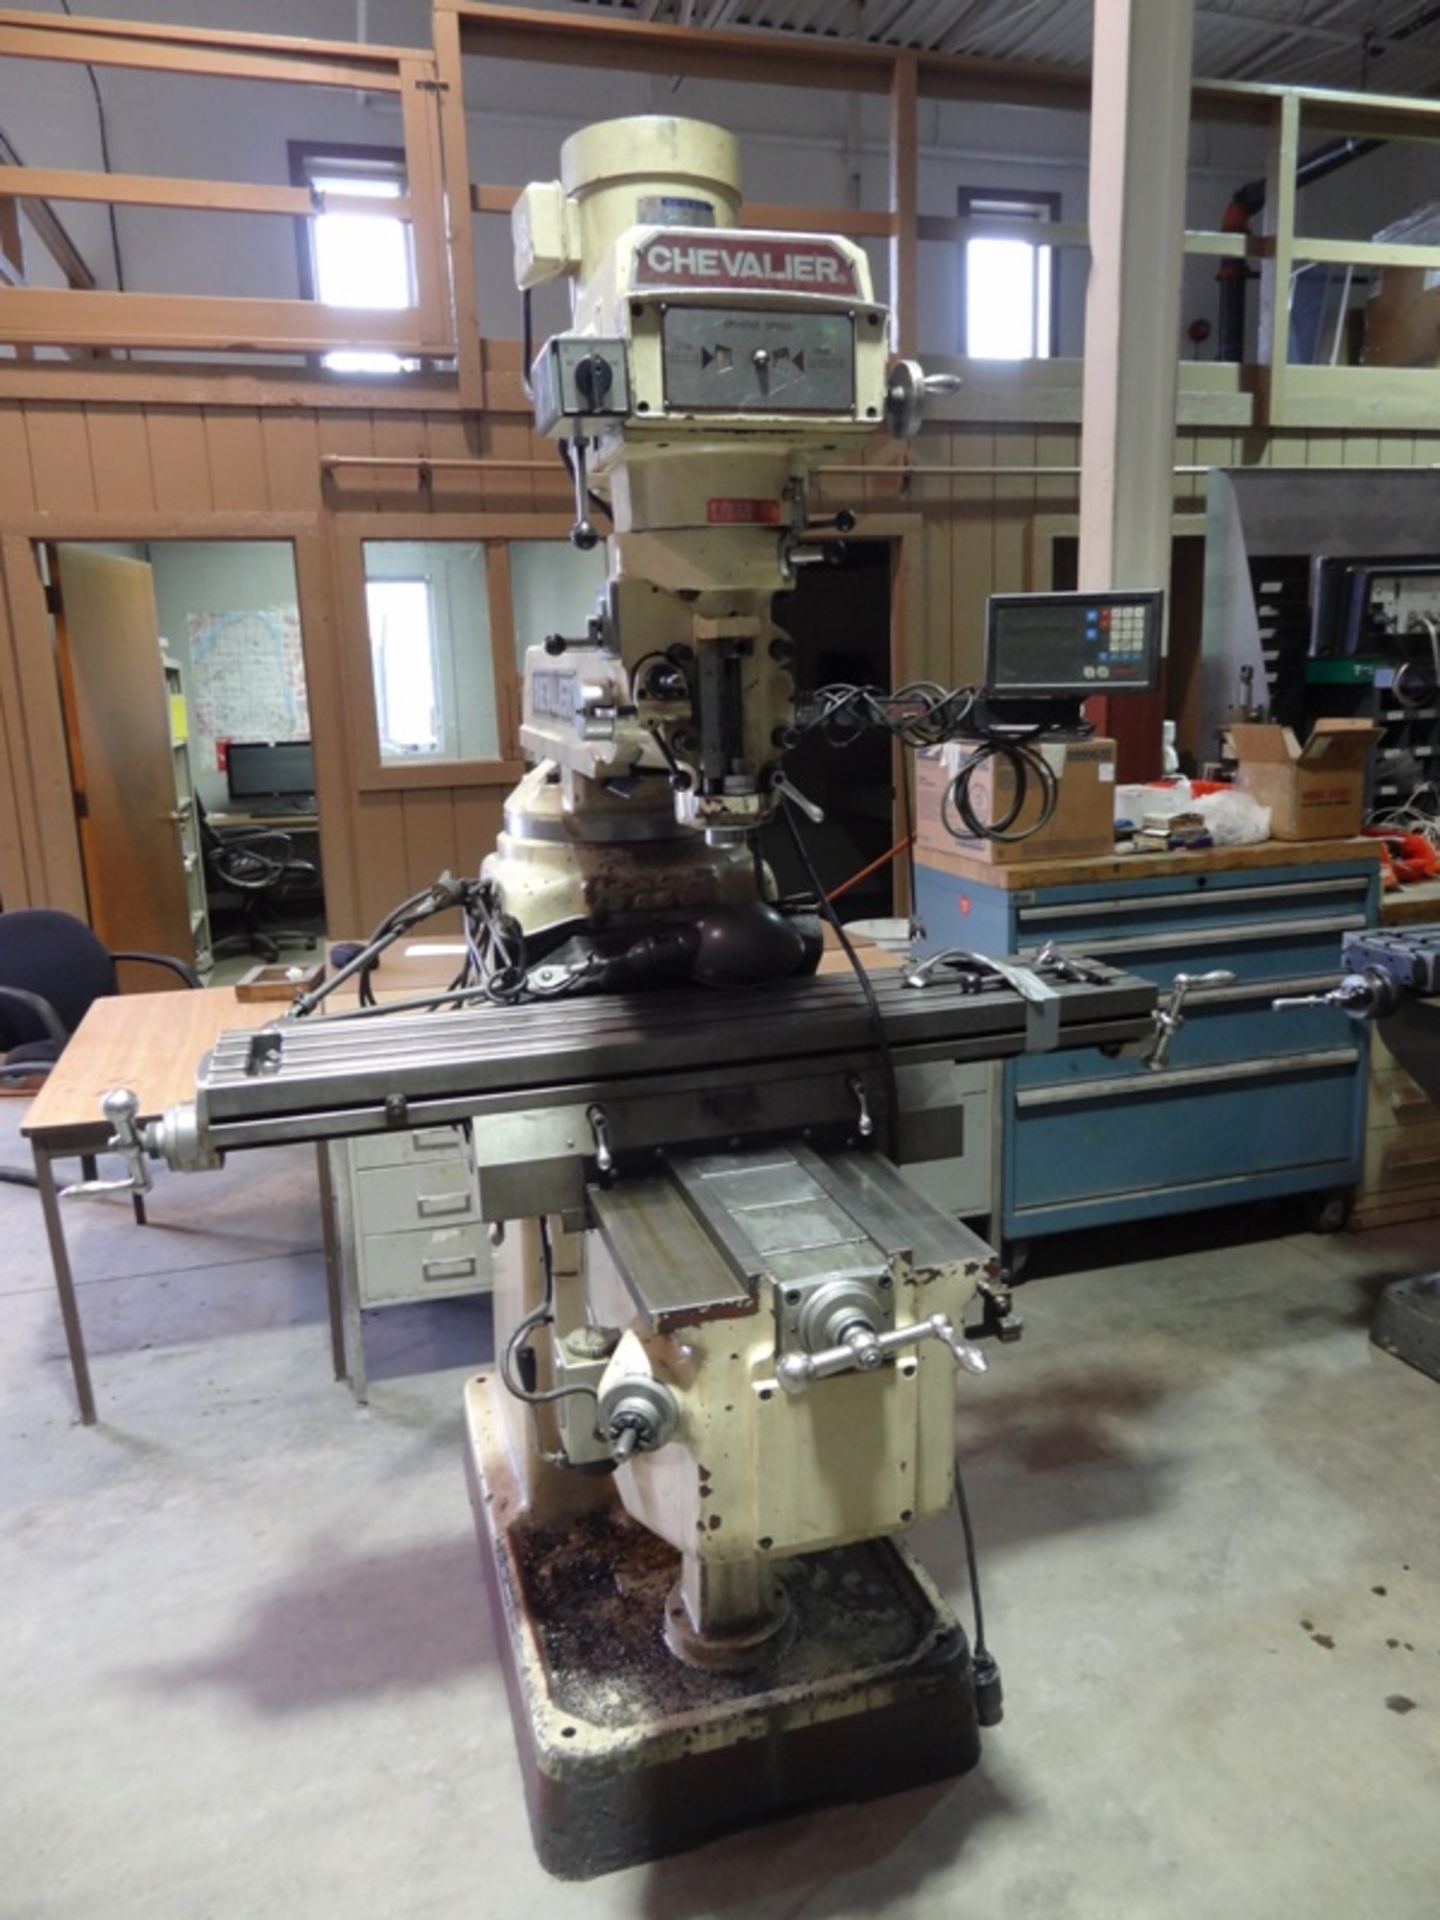 CHEVALIER KNEE MILL WITH DRO, SN 842167, LOCATION MI, BUYER TO SHIP LOADING FEE 150 - Image 2 of 8